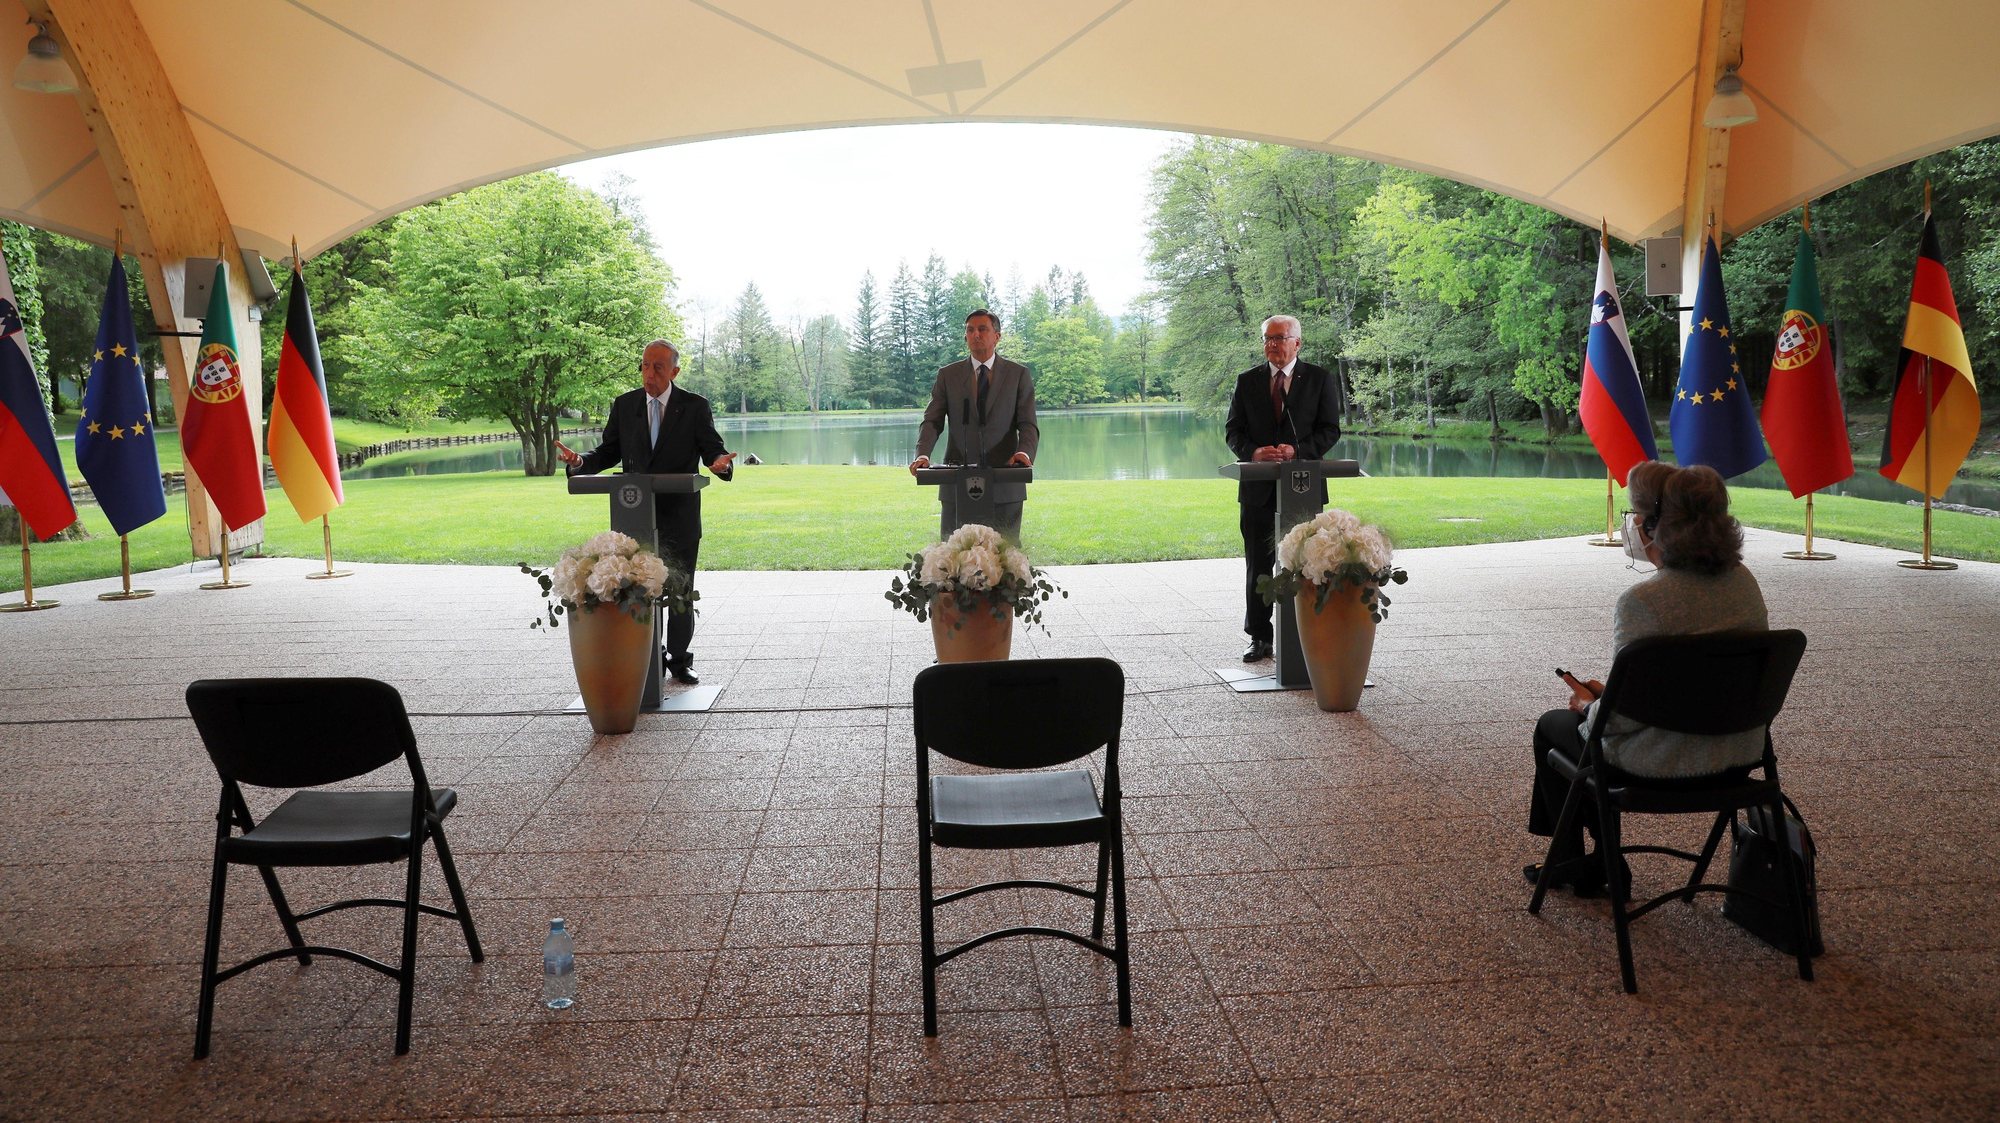 The President of Portugal, Marcelo Rebelo de Sousa (L) with the President of Germany, Frank-Walter Steinmeier (R) and the President of Slovenia, Borut Pahor (C), during a meeting of the Trio of Presidencies of the European Union at Brdo Castle in Kranj, Slovenia, 30 May 2021. Marcelo Rebelo de Sousa is on an official visit to Slovenia between Sunday and Tuesday, and will then head to Bulgaria. ESTELA SILVA/LUSA